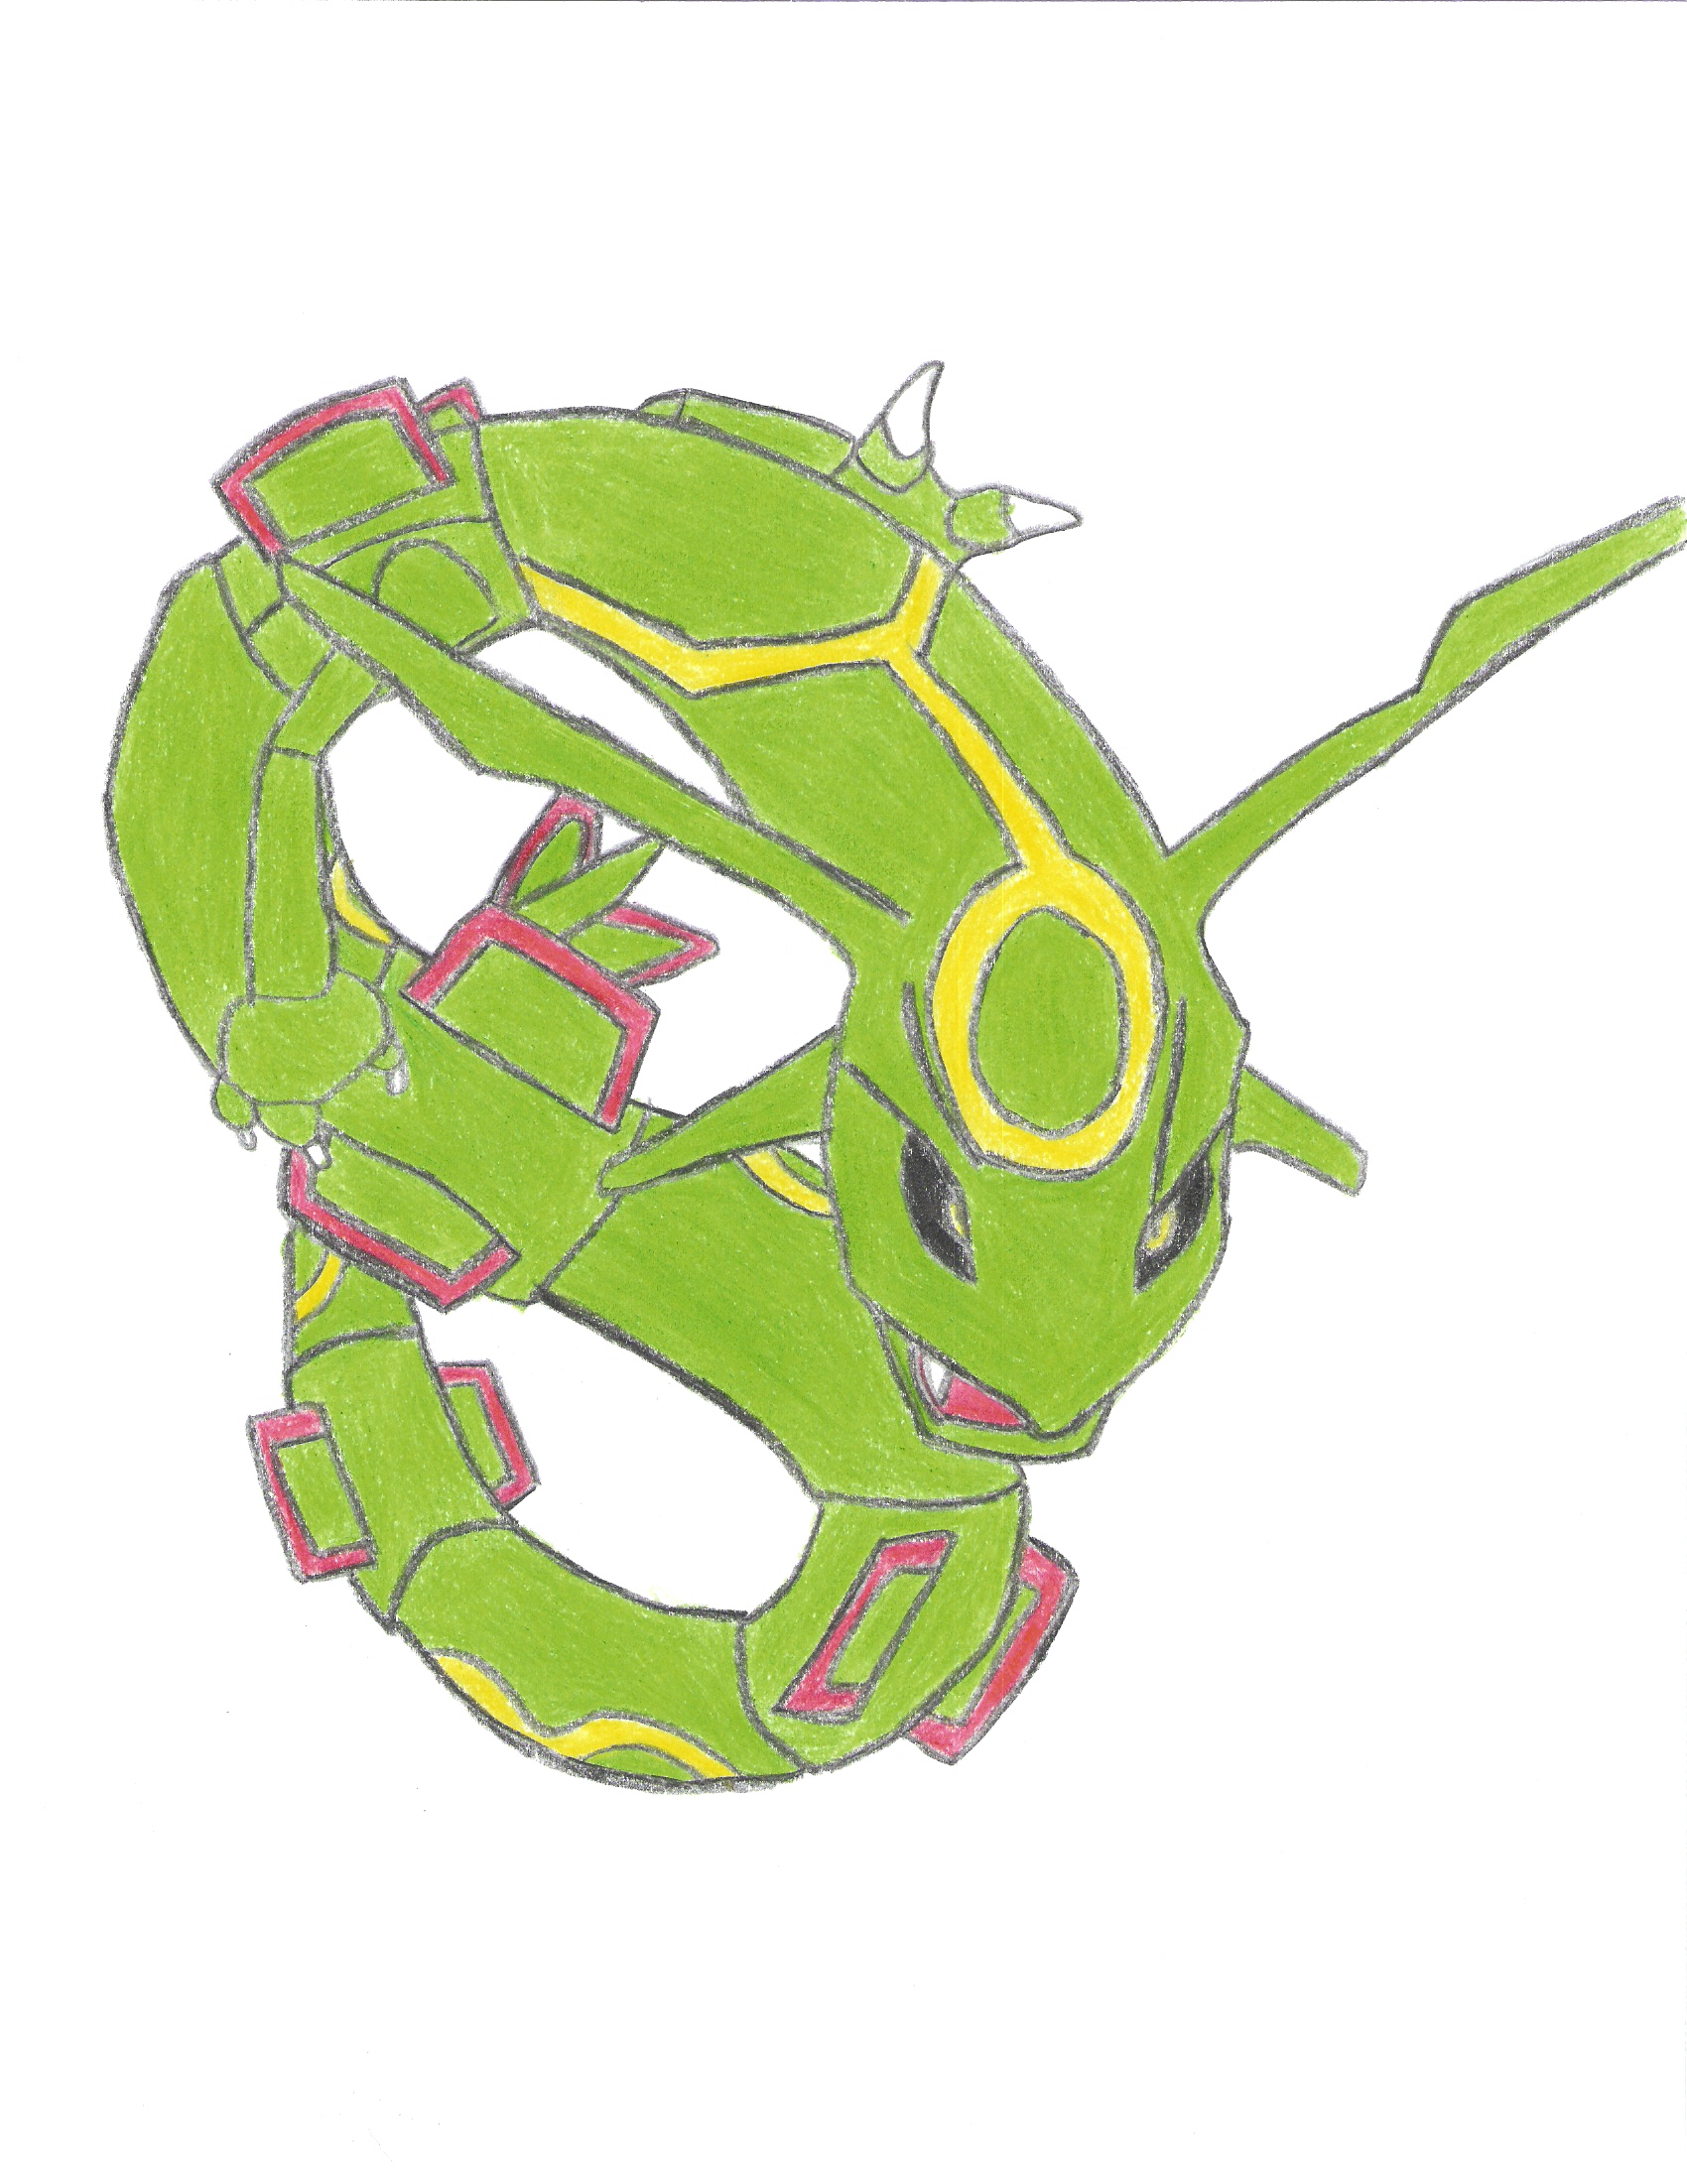 rayquaza contest entry by knives7